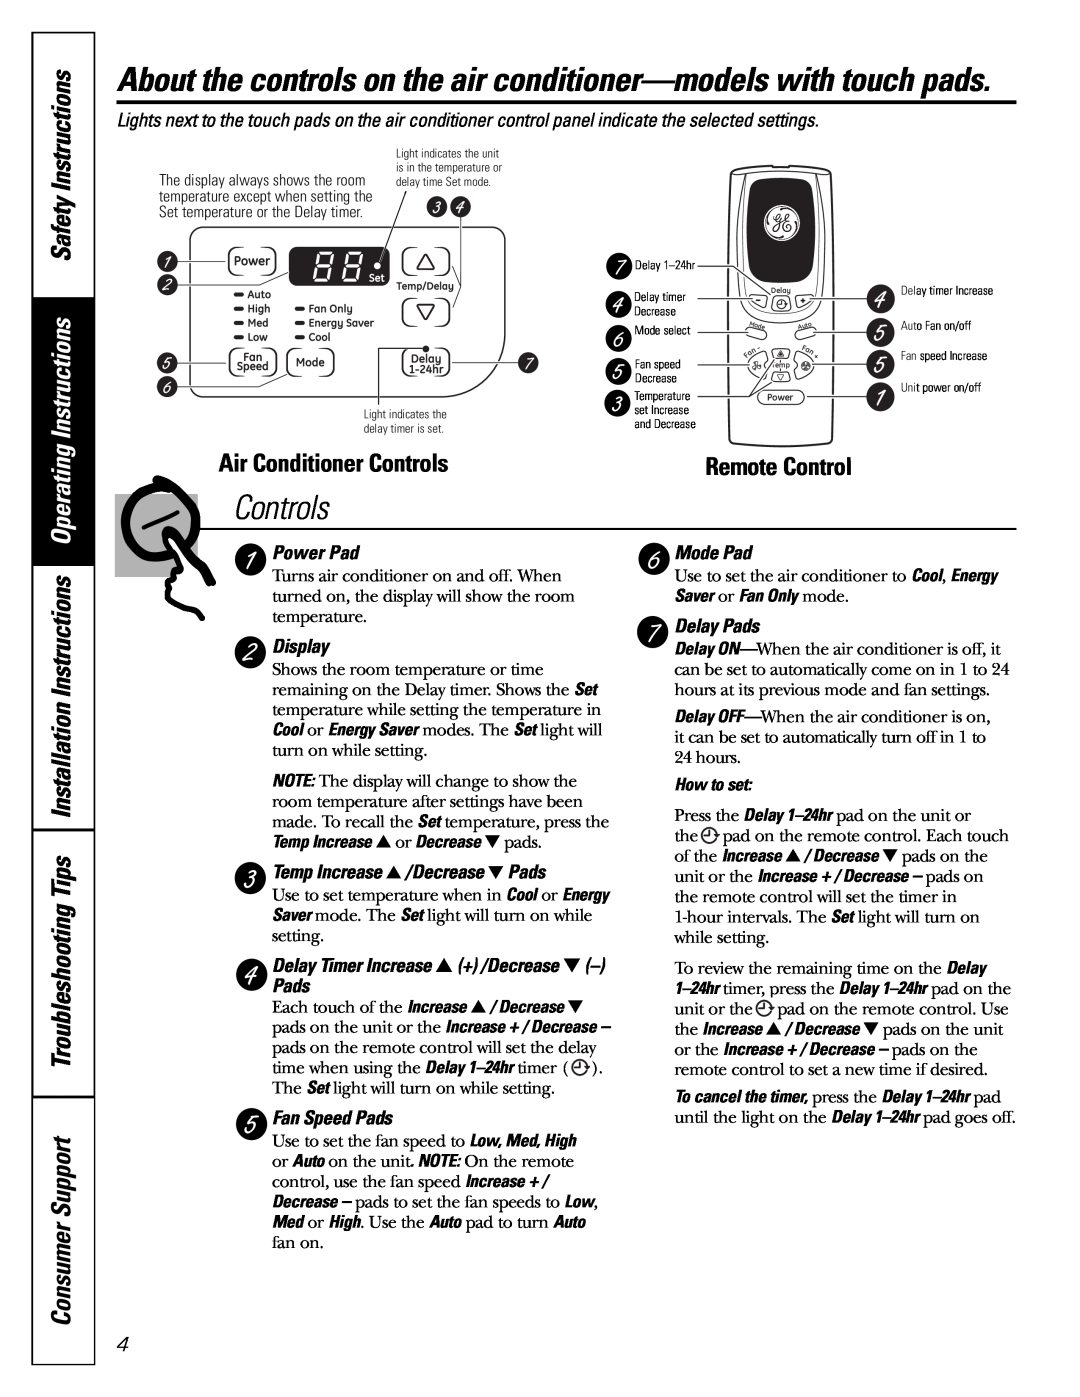 GE AET05 Instructions Safety, Air Conditioner Controls, Power Pad, Display, Temp Increase /Decrease Pads, Mode Pad 